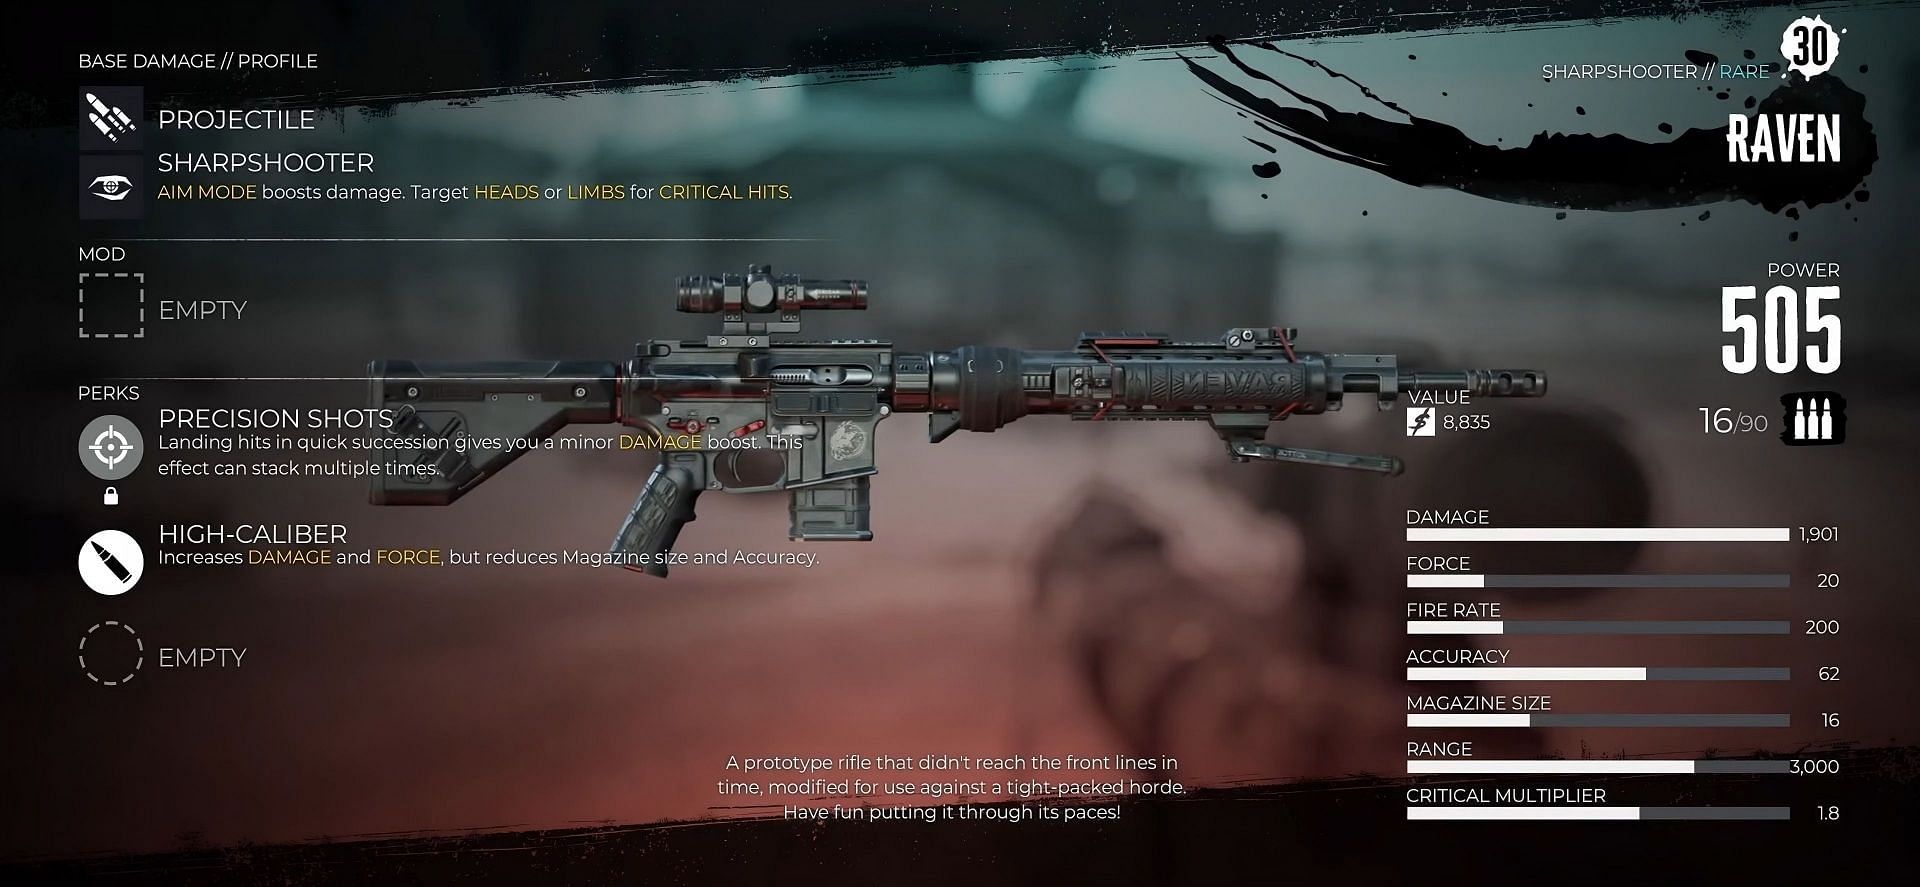 Ranged weapon stats explained in Dead Island 2 (Image via Dambuster Studios)